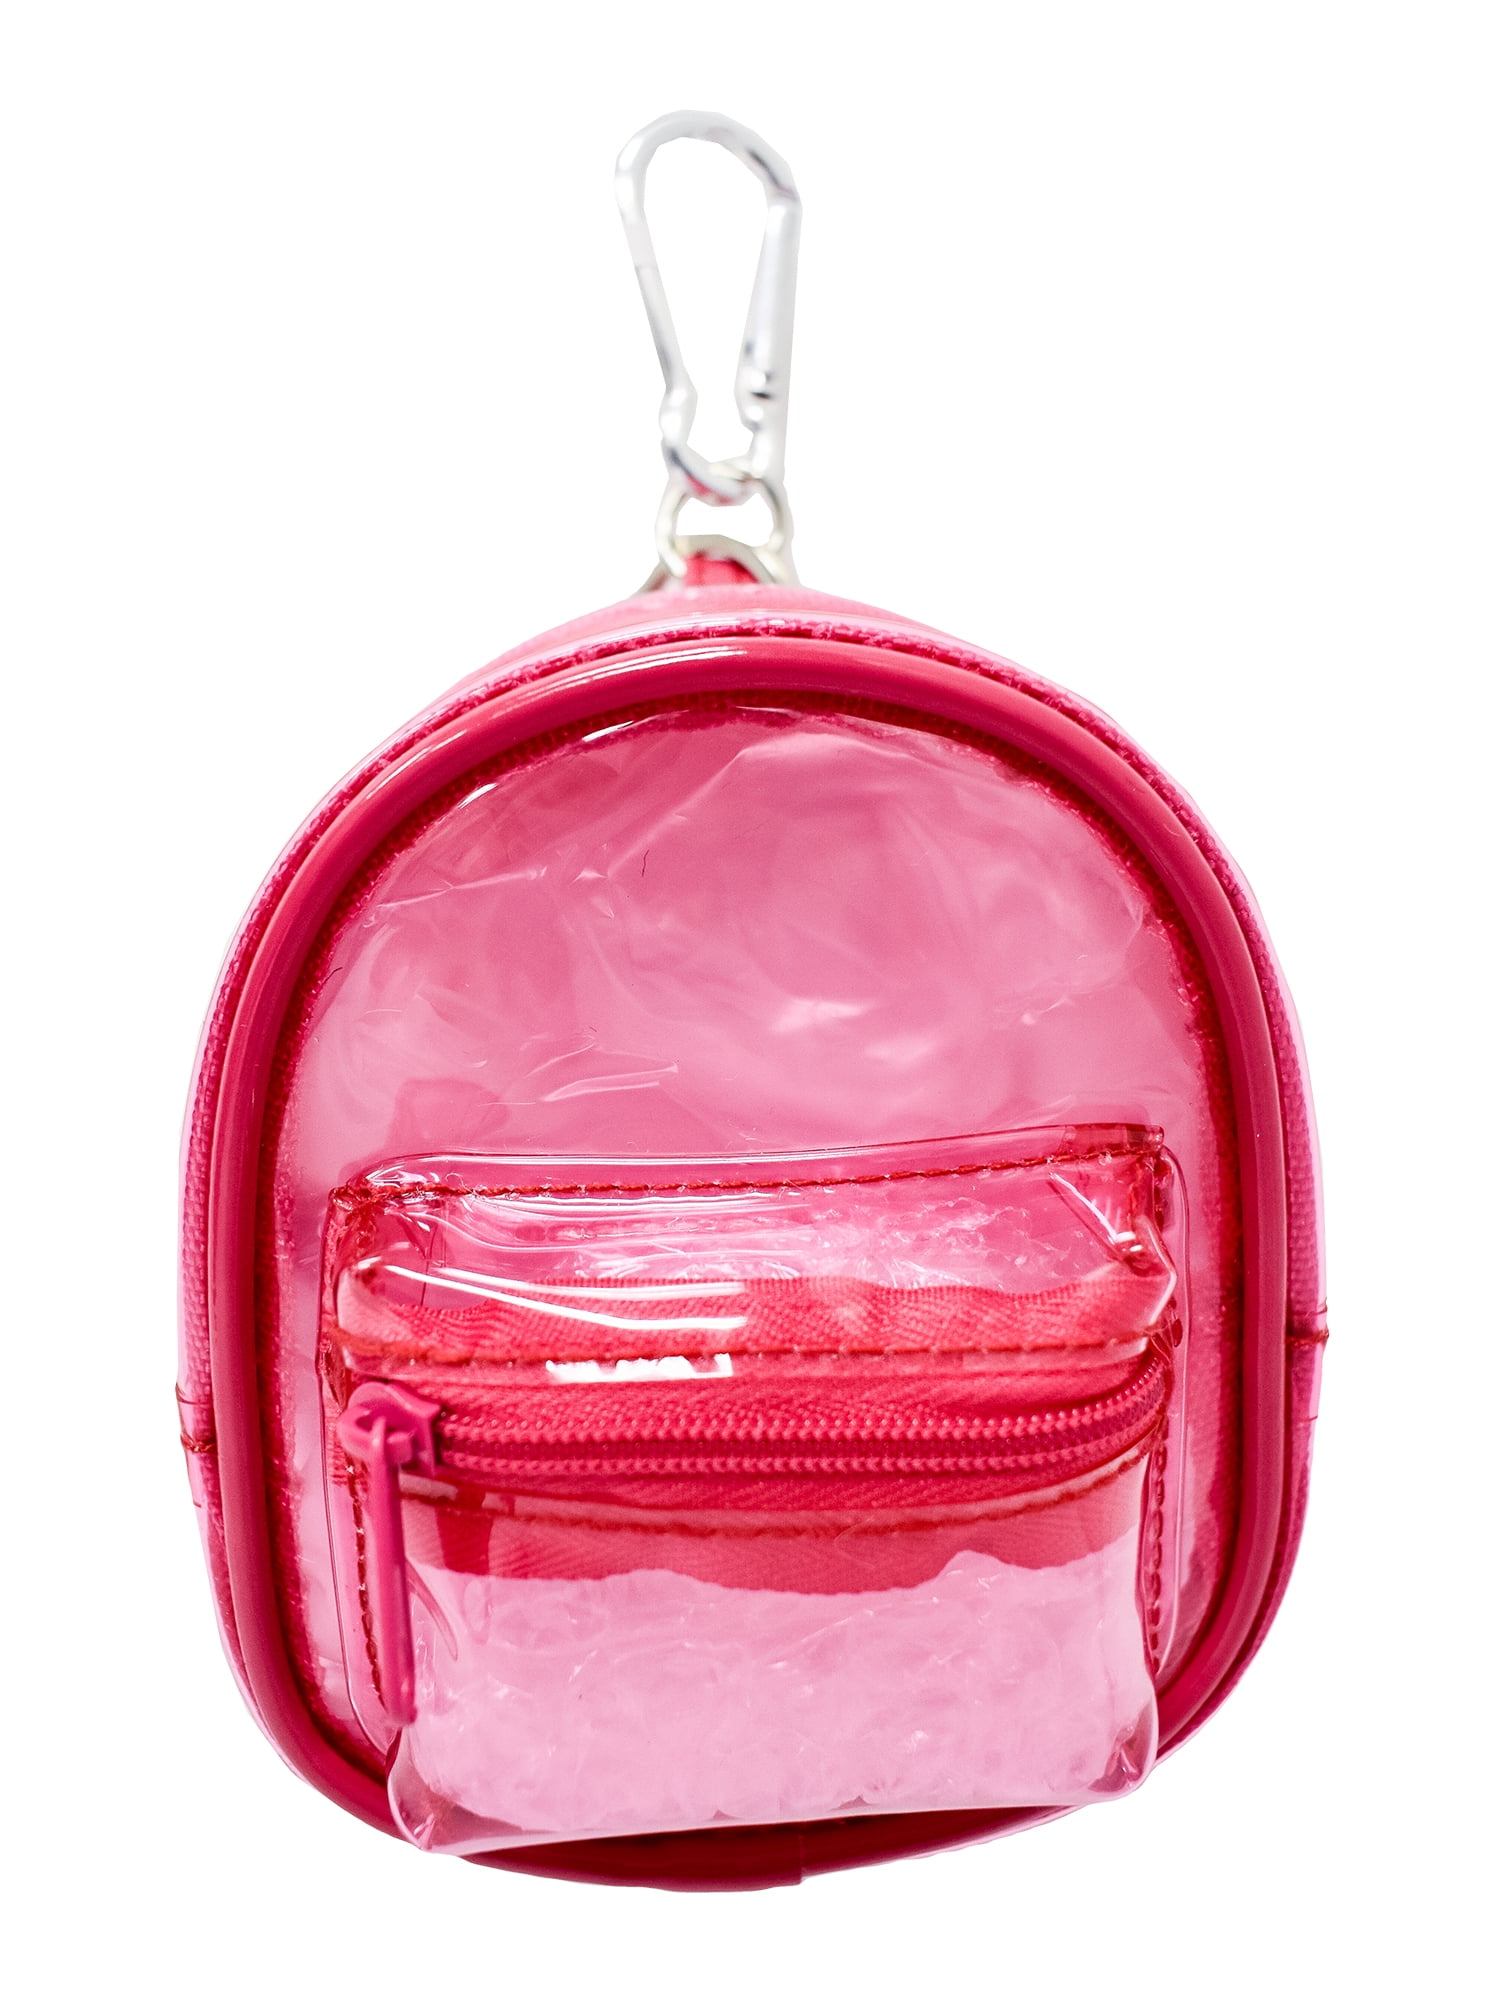 Claire's Girls’ Clear Pink Mini Backpack Keychain, Cute Gift, 76113